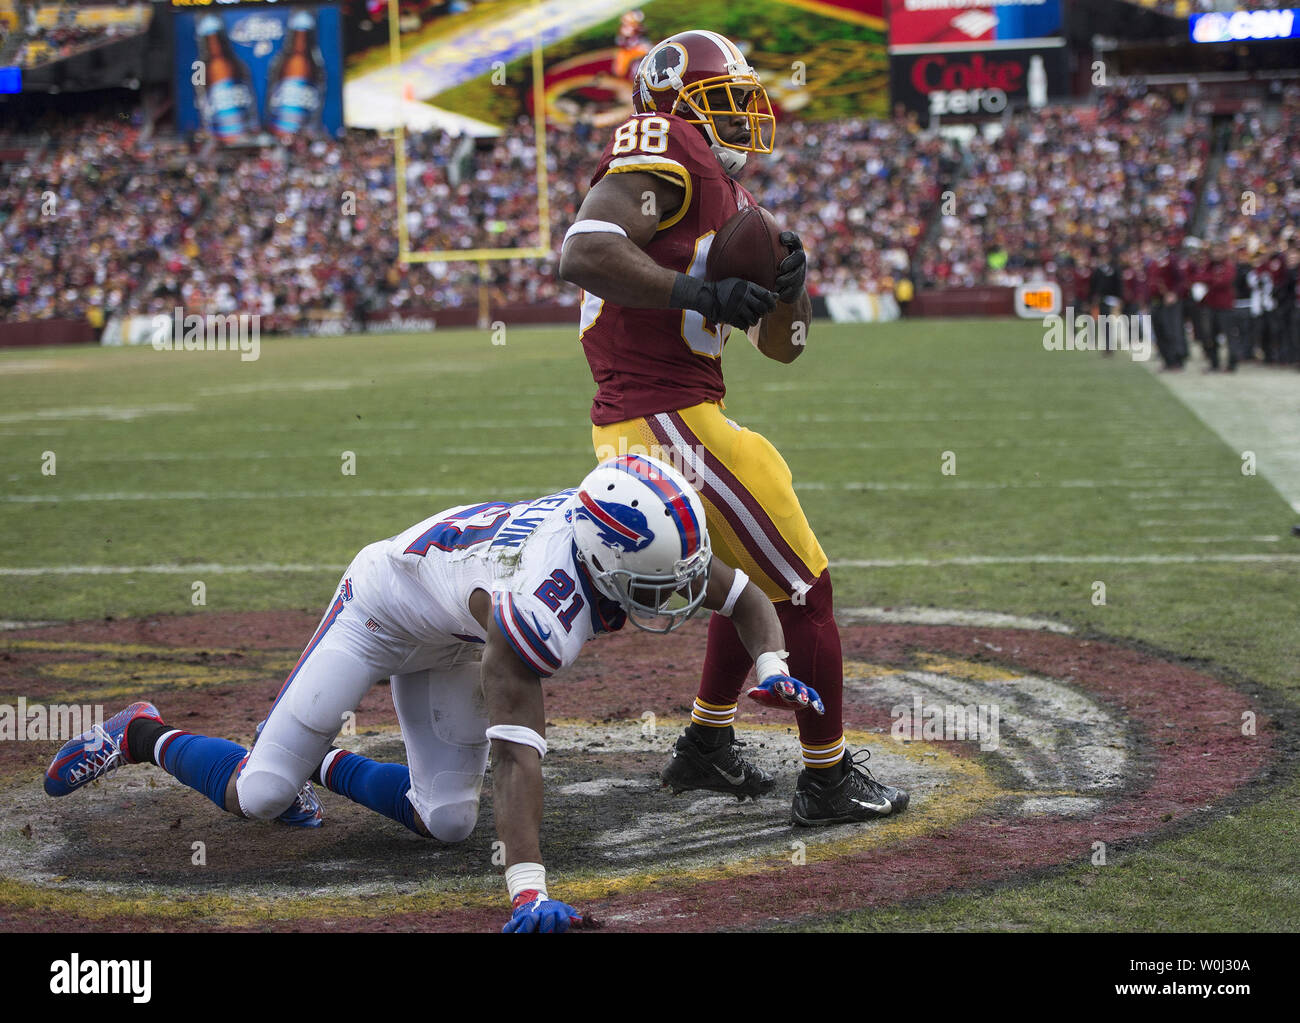 Washington Redskins wide receiver Pierre Garcon scores a touchdown over Buffalo Bills strong safety Leodis McKelvin (21) in the fourth quarter at FedEx Field in Landover, Maryland on December 20, 2015. Photo by Kevin Dietsch/UPI Stock Photo